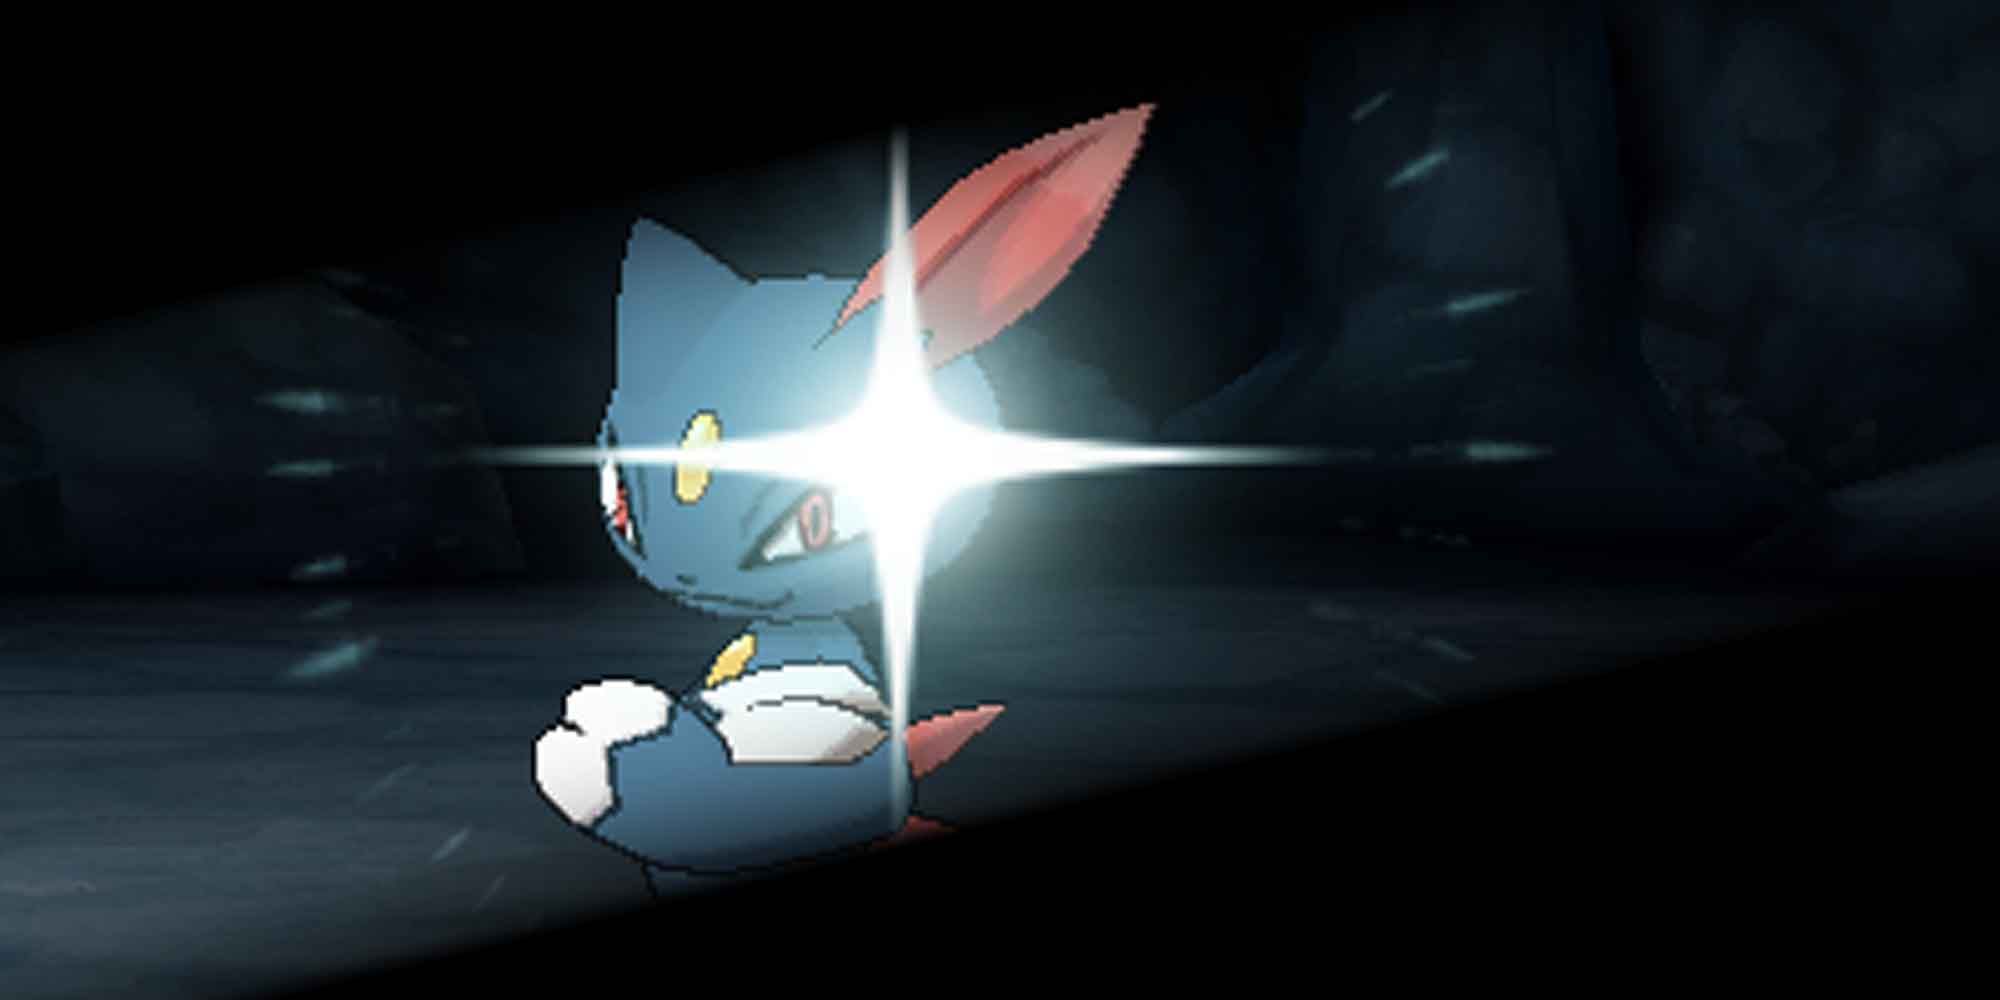 Sneasel using the Snatch move in Pokemon